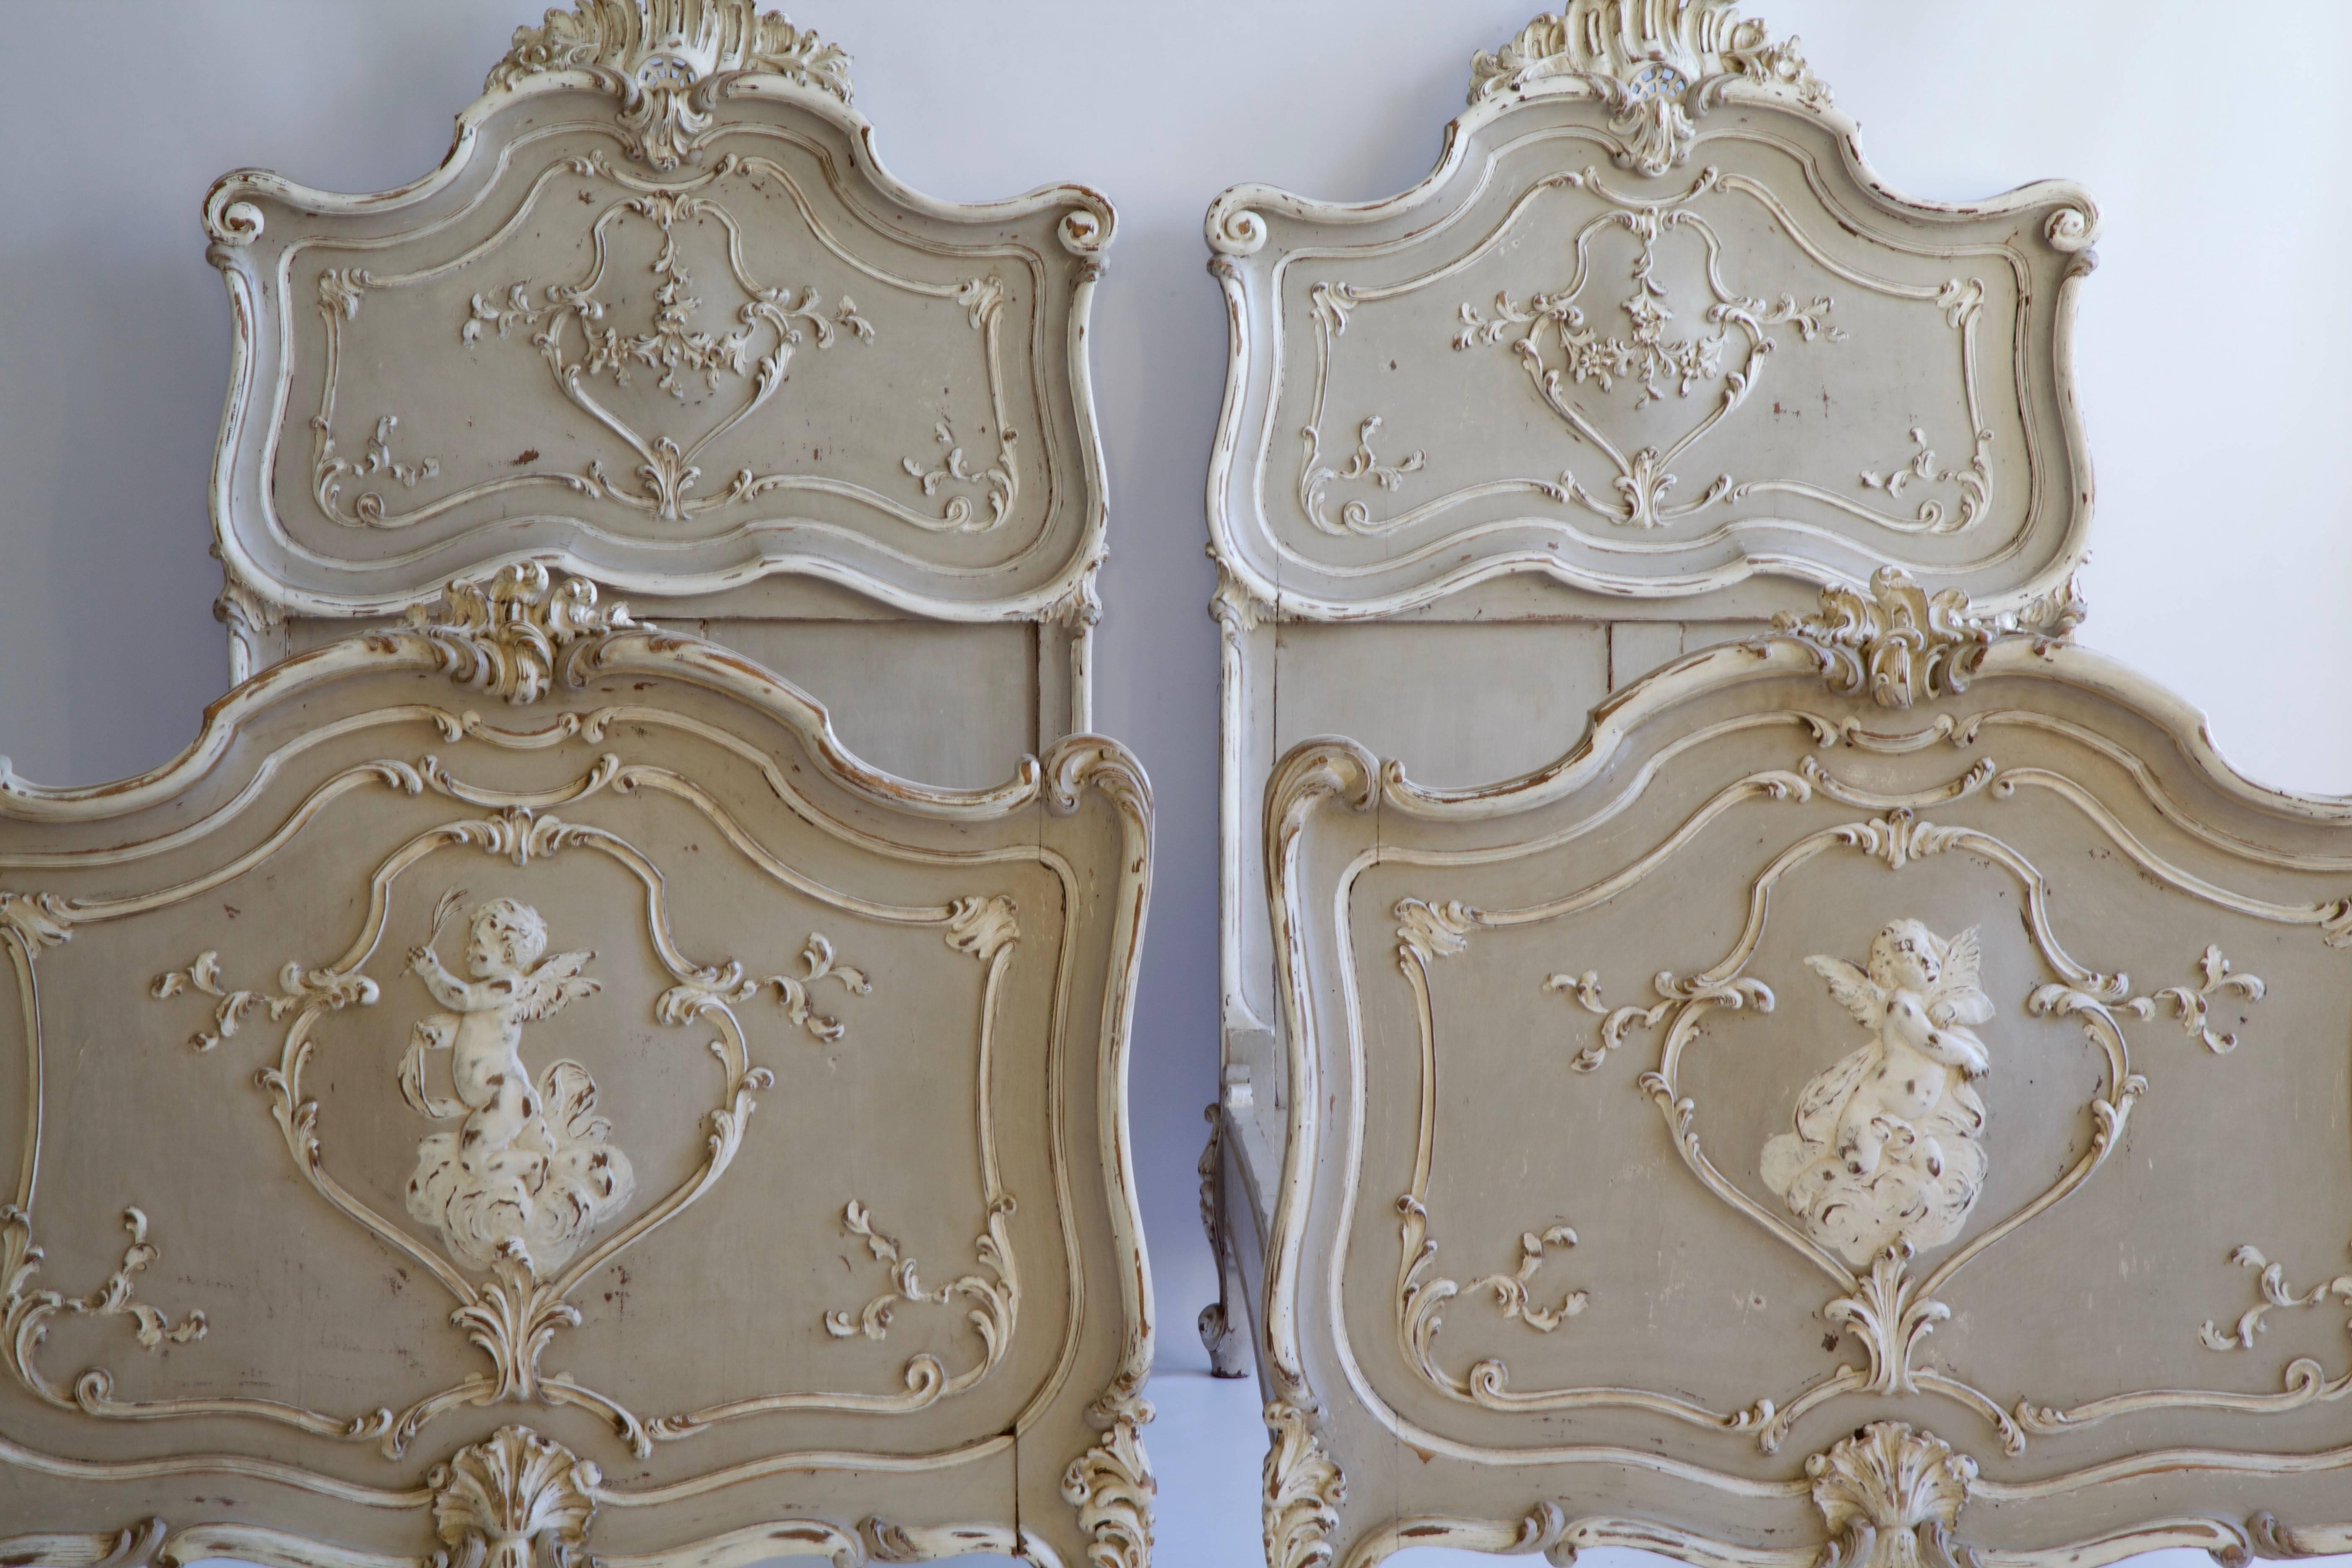 Pair of Louis XV style beds, circa late 19th century. Hand-carved with deeply carved cartouche designs and cherubs as the central theme on the footboards. Finished in the original polychrome paintwork of French grey with Ecru highlights.